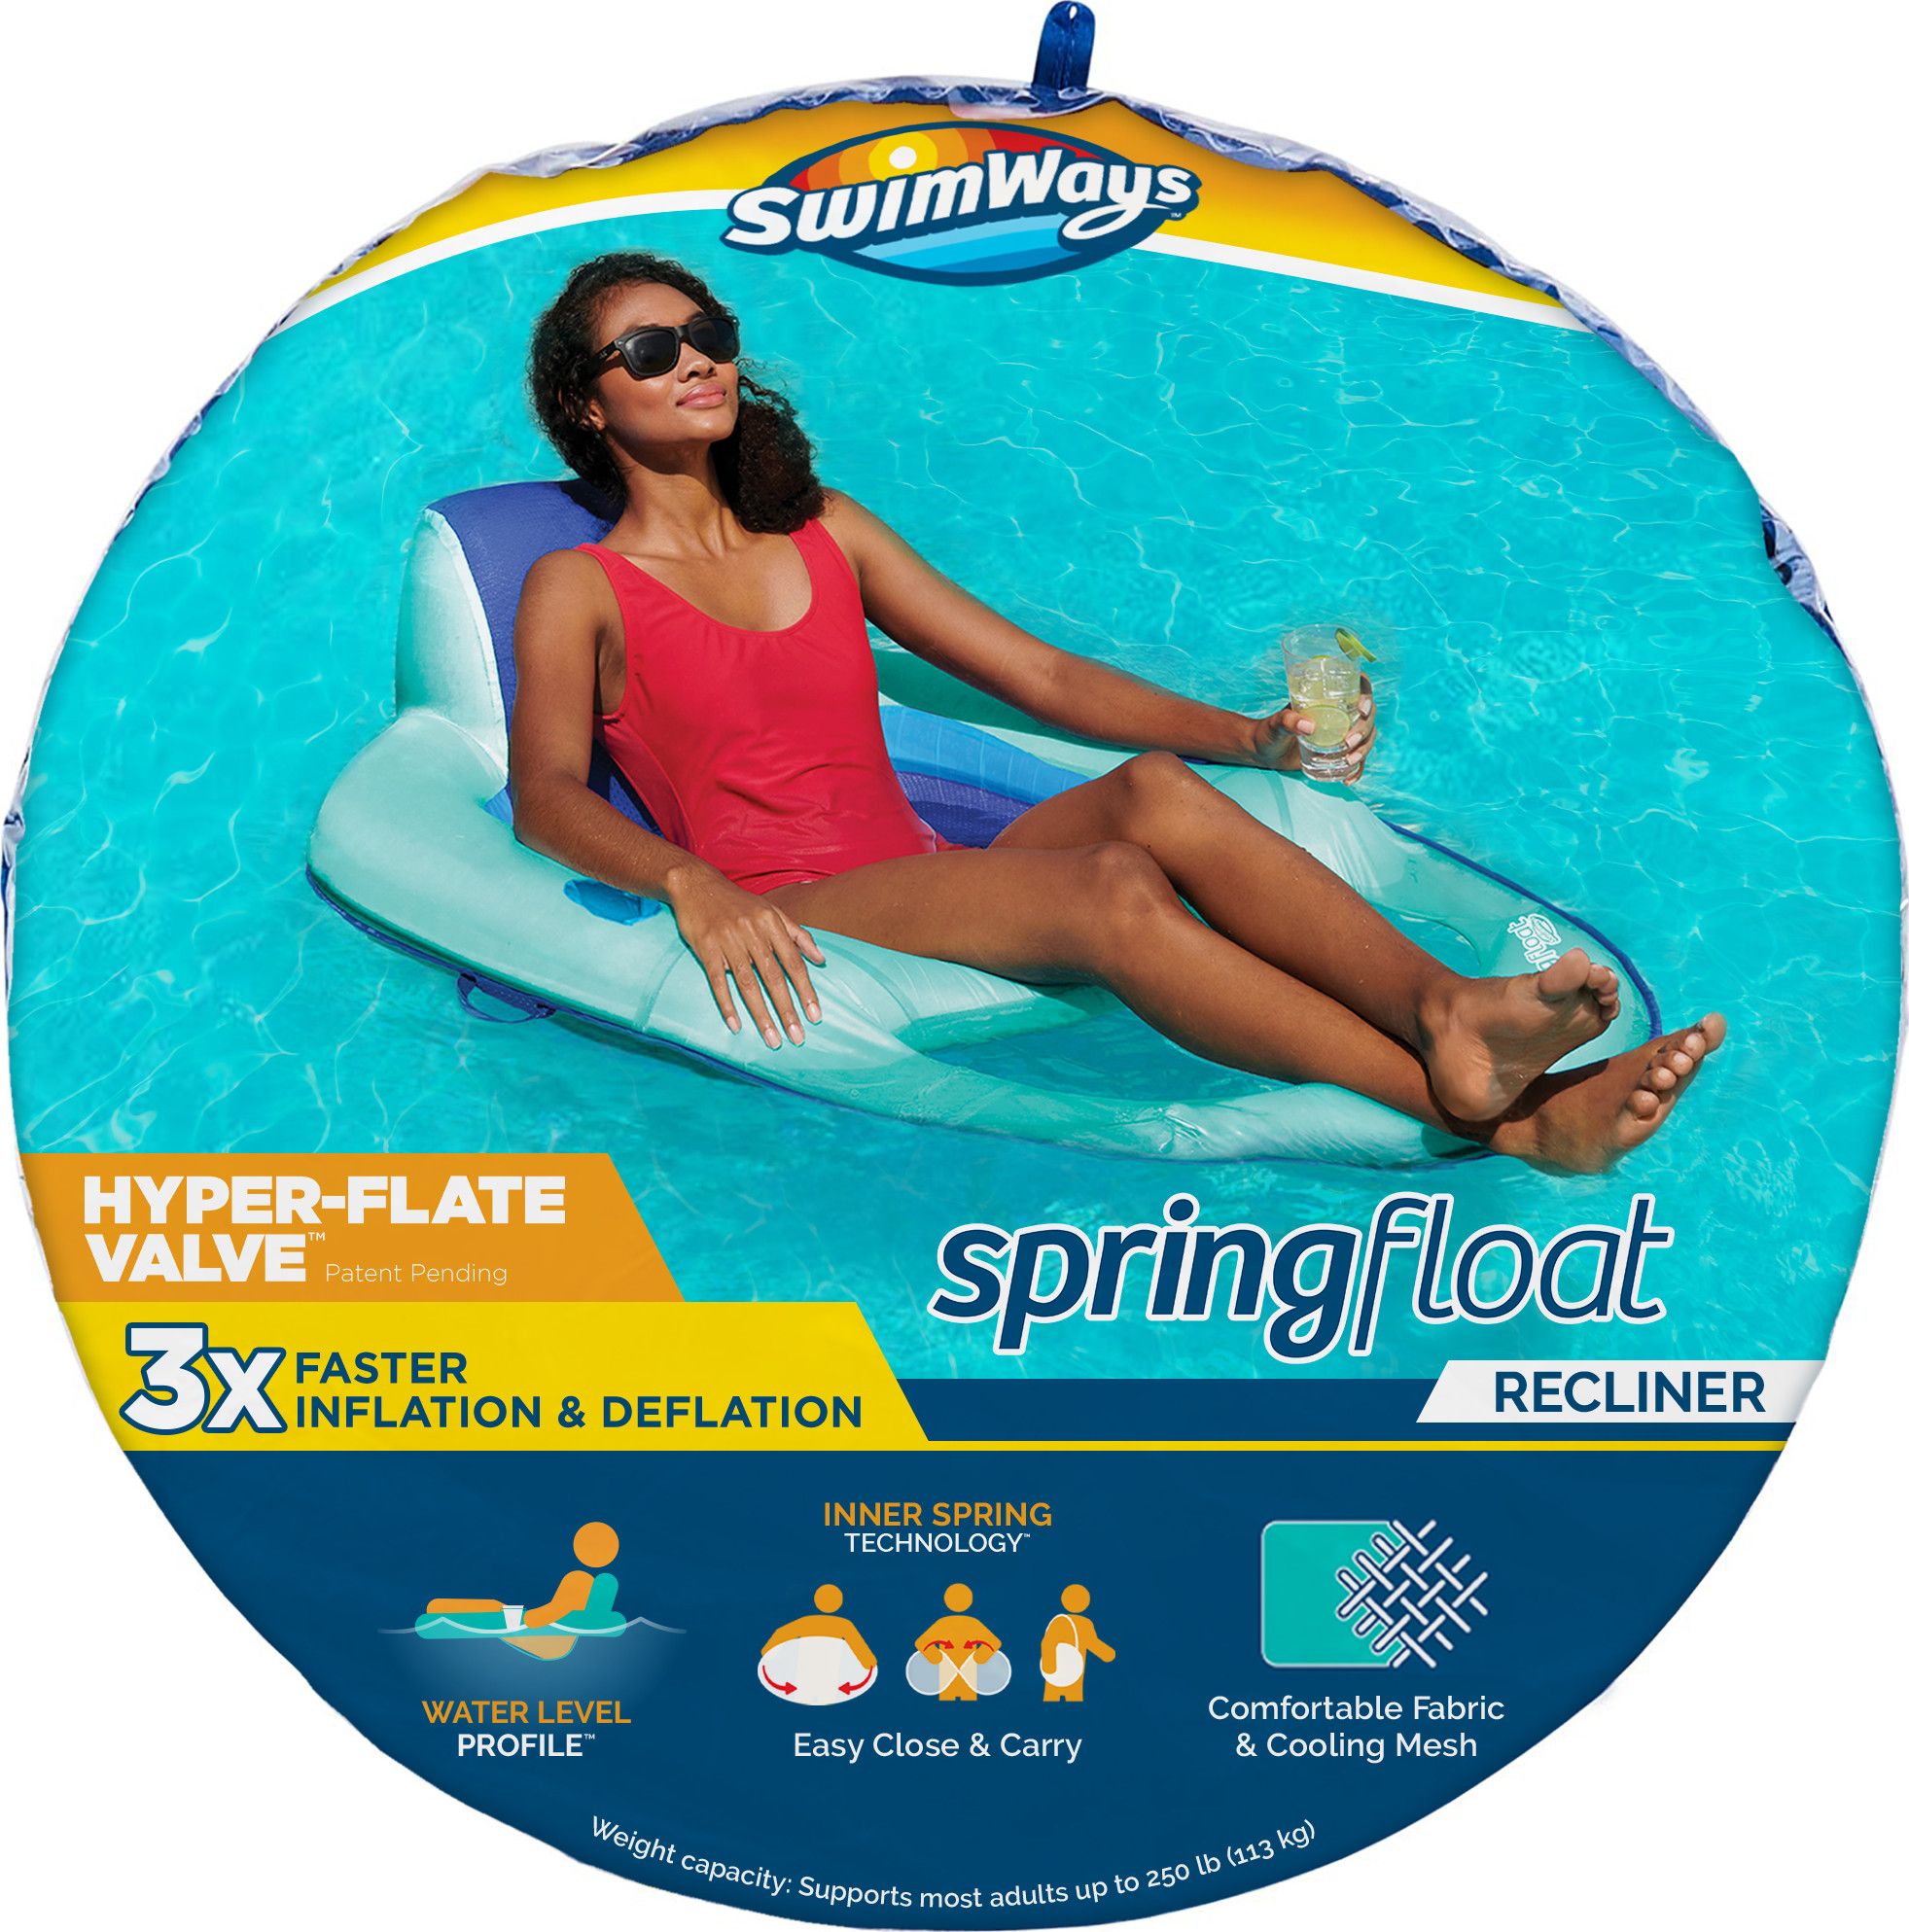 SwimWays Spring Float Recliner Pool Lounger with Hyper-Flate Valve, Inflatable Pool Float, Teal | Walmart (US)